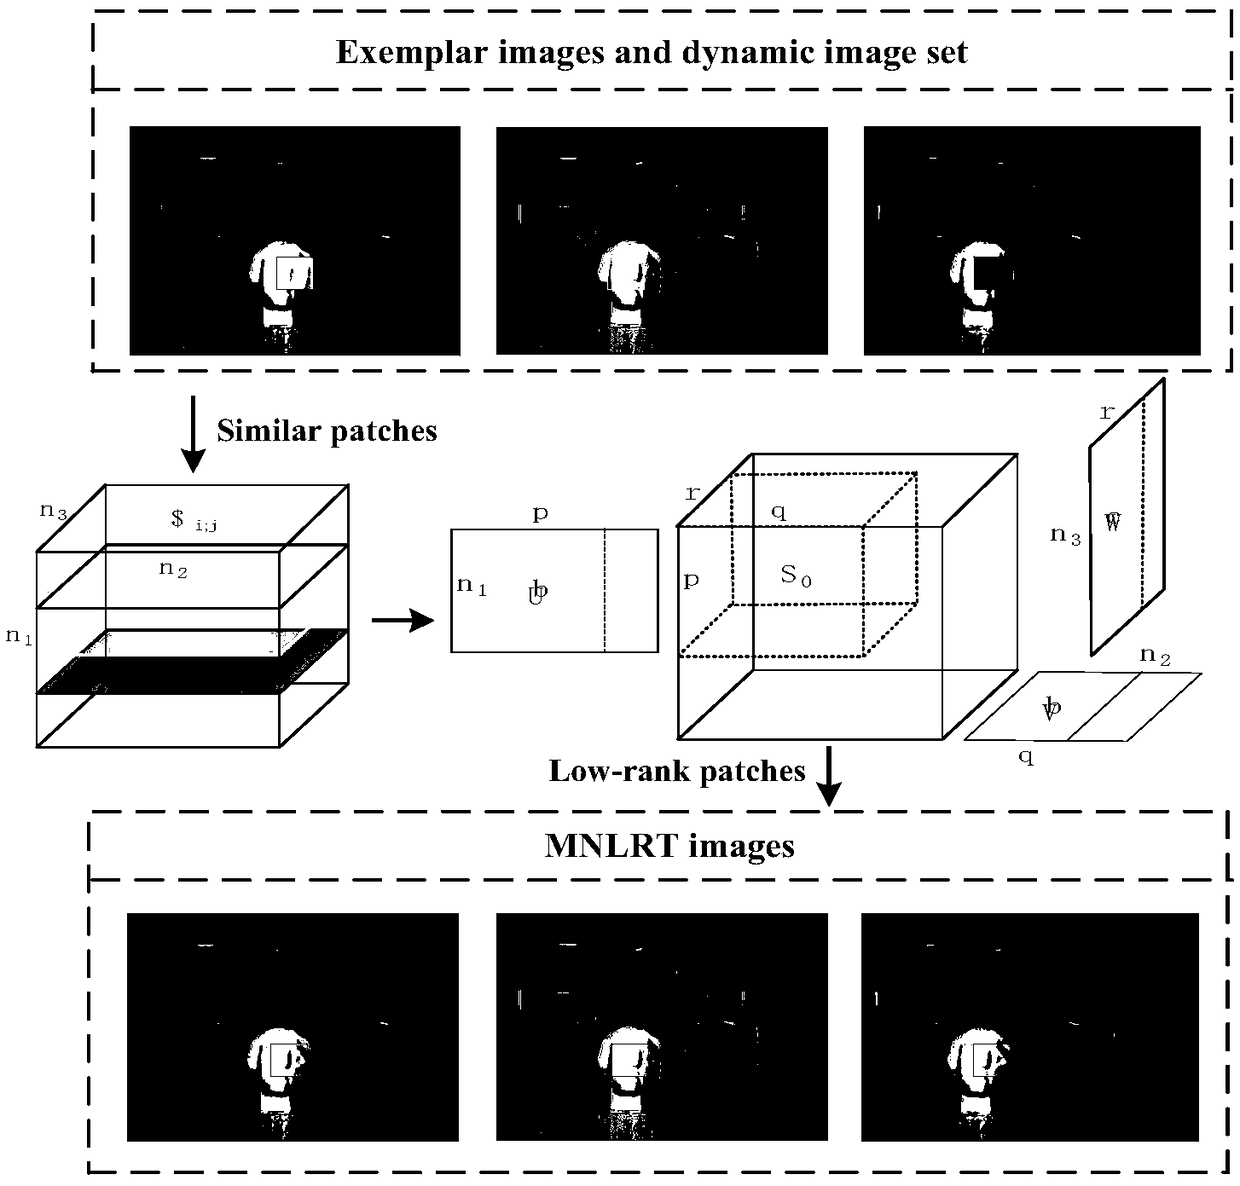 A compressed perceptual image reconstruction method based on multi-view images